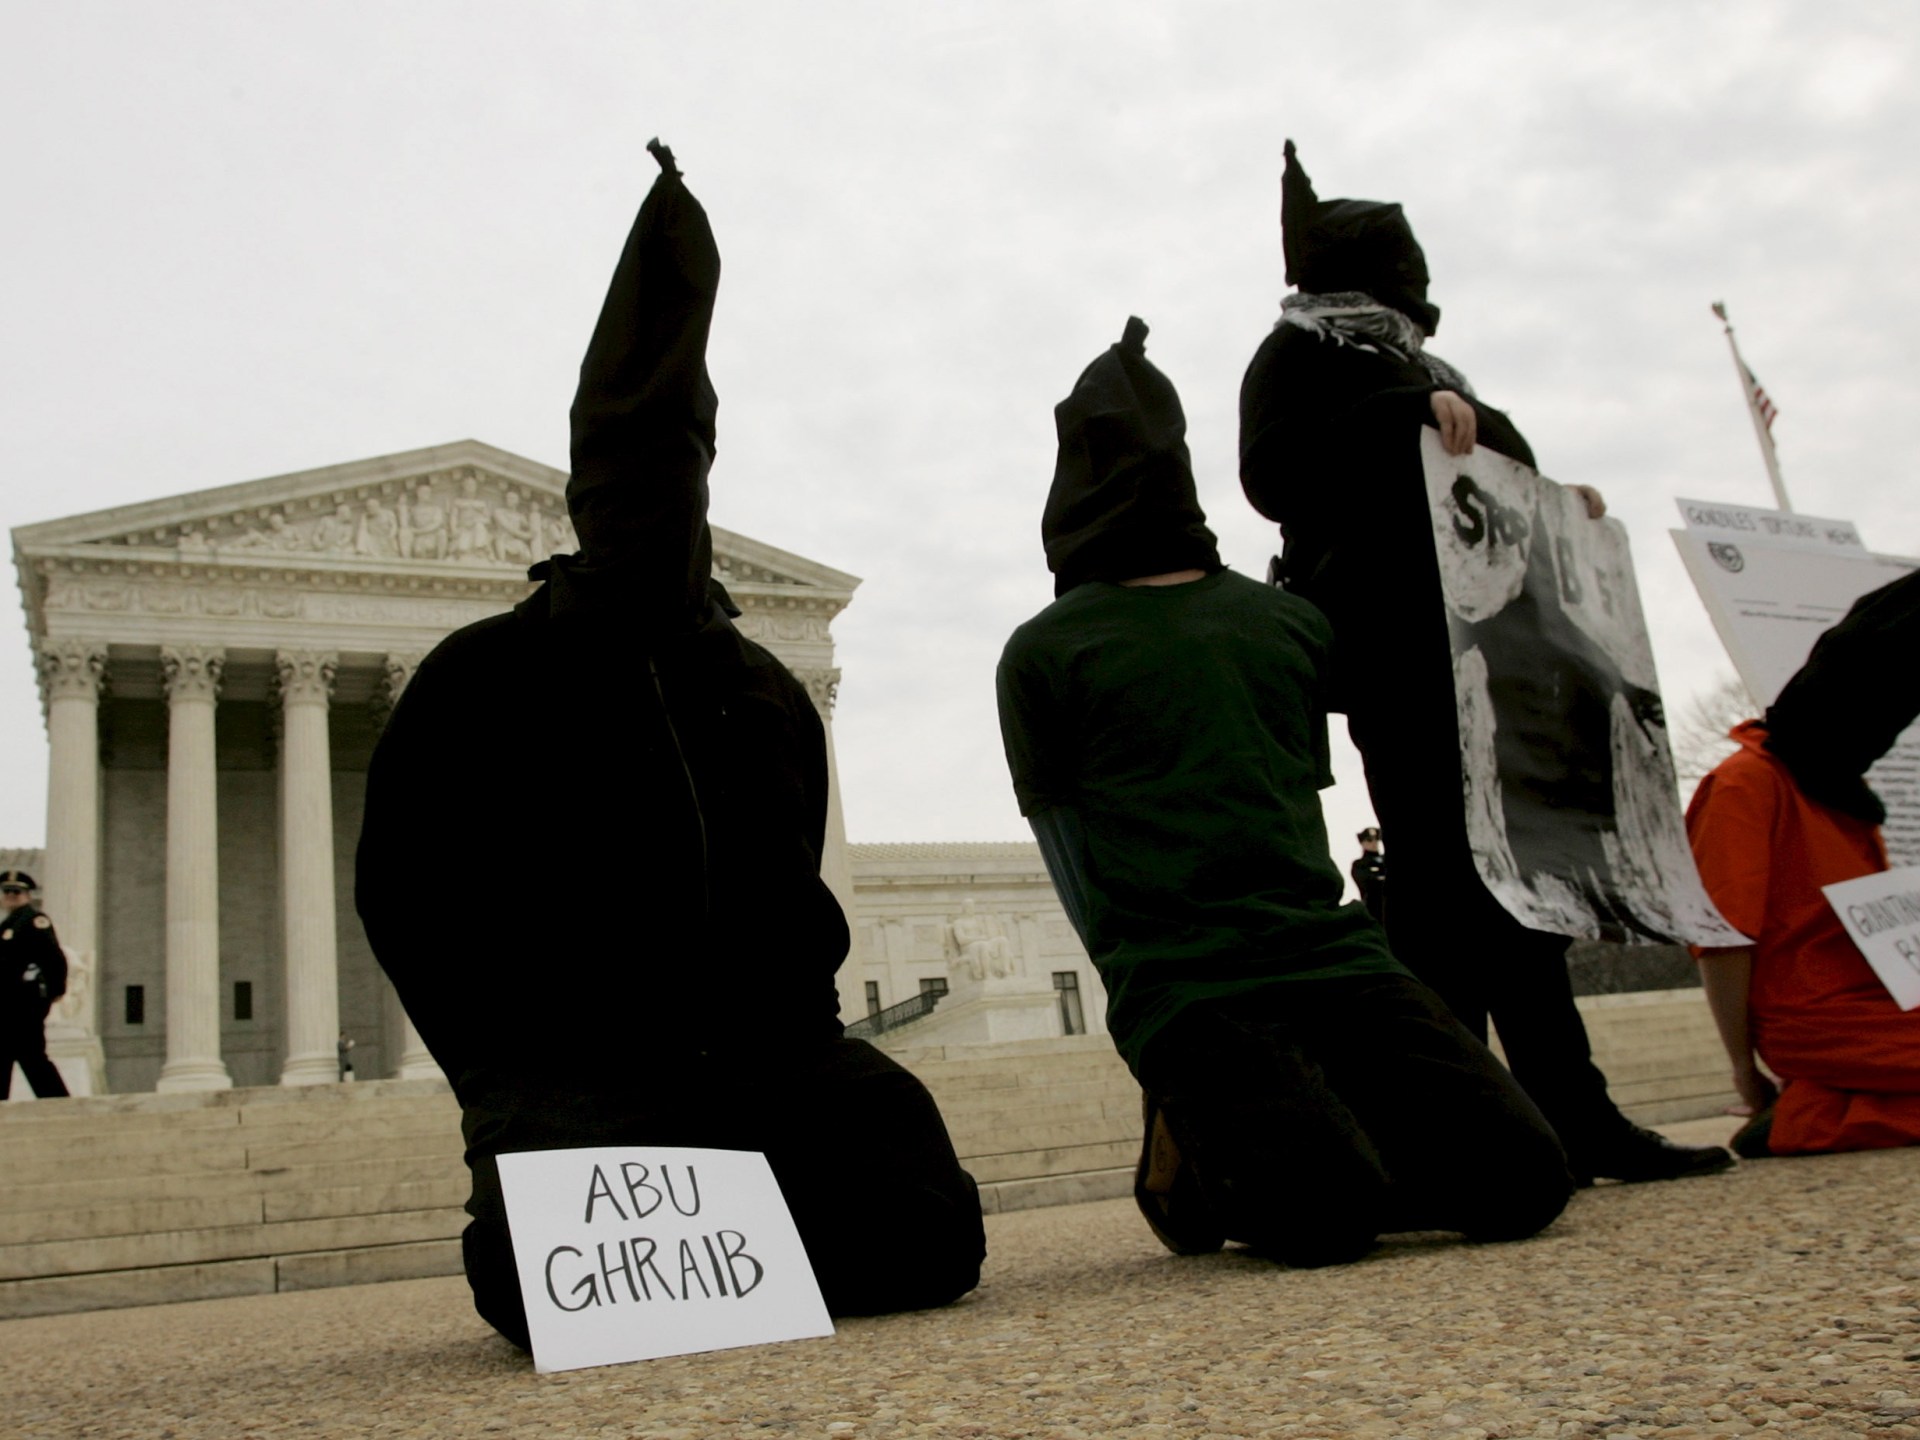 The Abu Ghraib case is an important milestone for justice